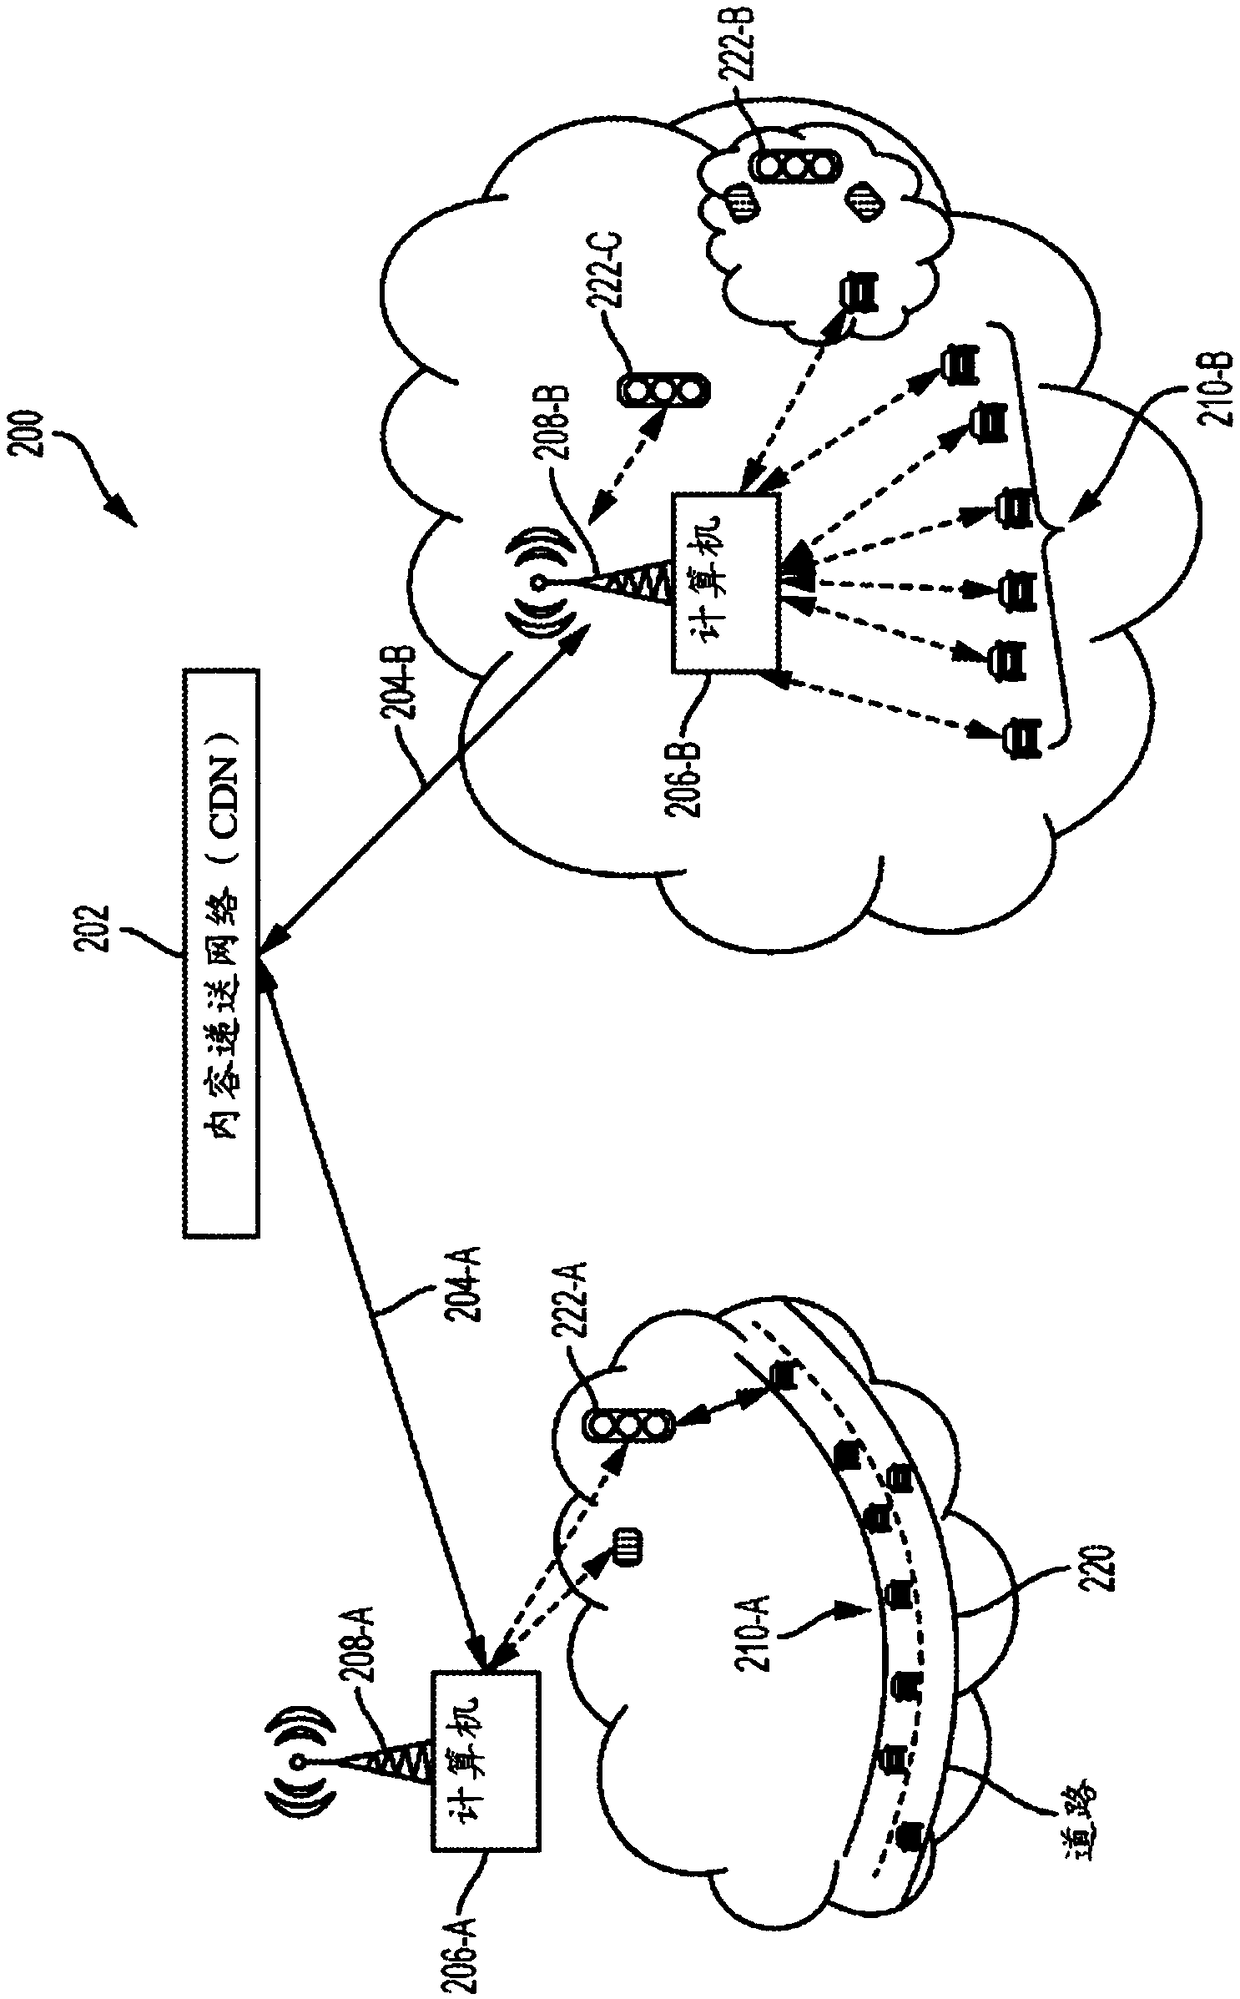 Cloud-based dynamic vehicle sharing system and method